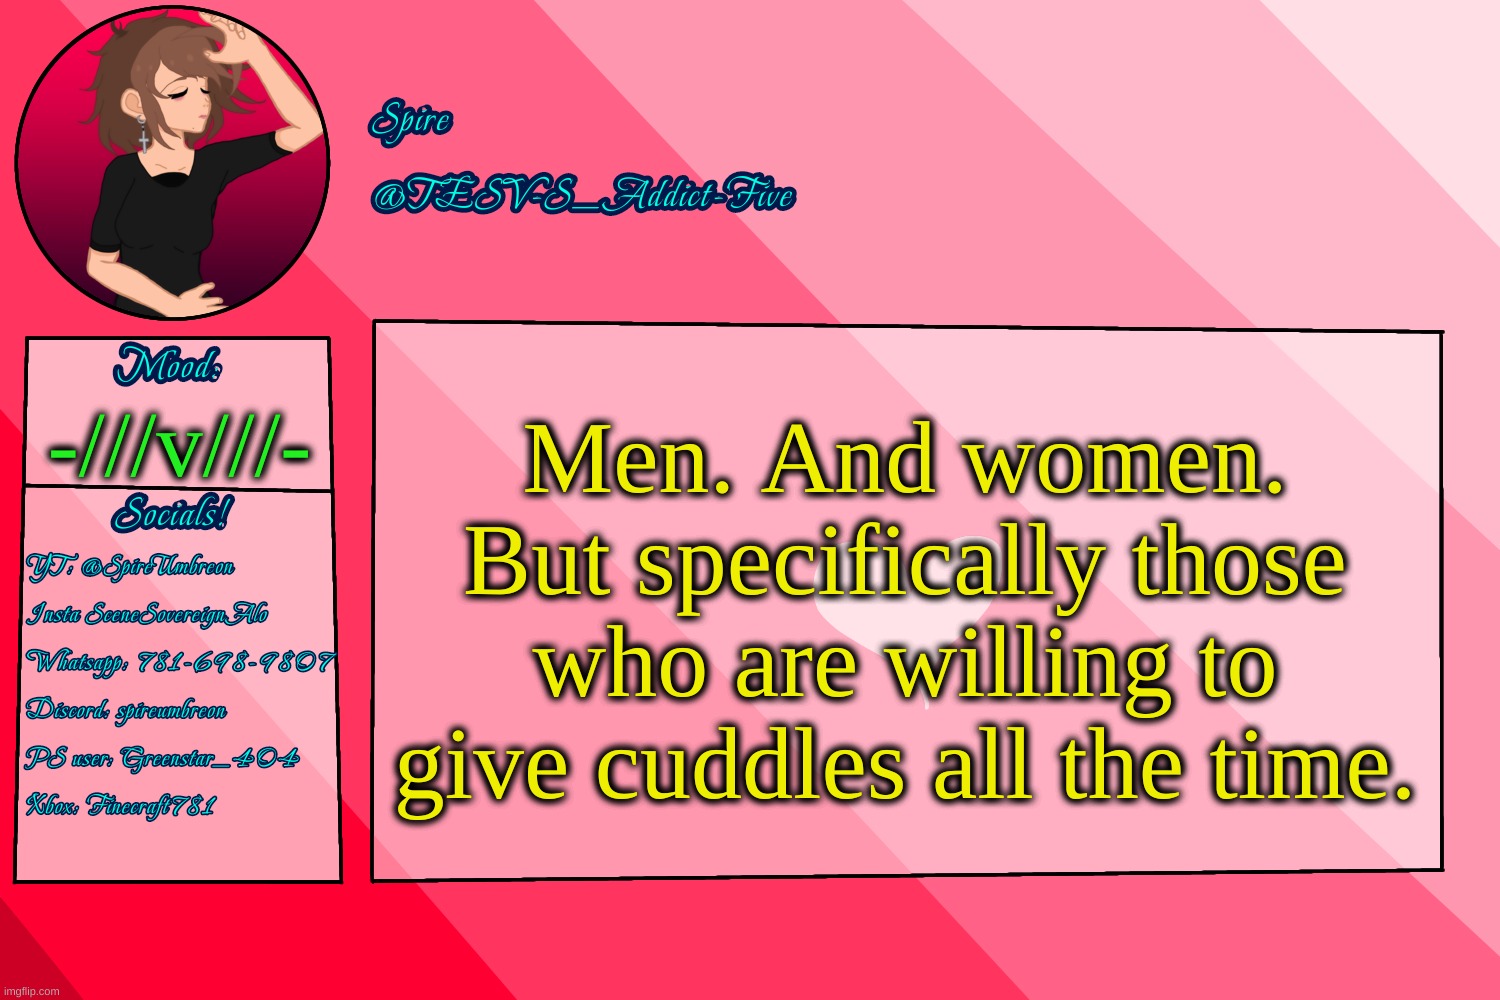 . | Men. And women.
But specifically those who are willing to give cuddles all the time. -///v///- | image tagged in tesv-s_addict-five announcement template | made w/ Imgflip meme maker